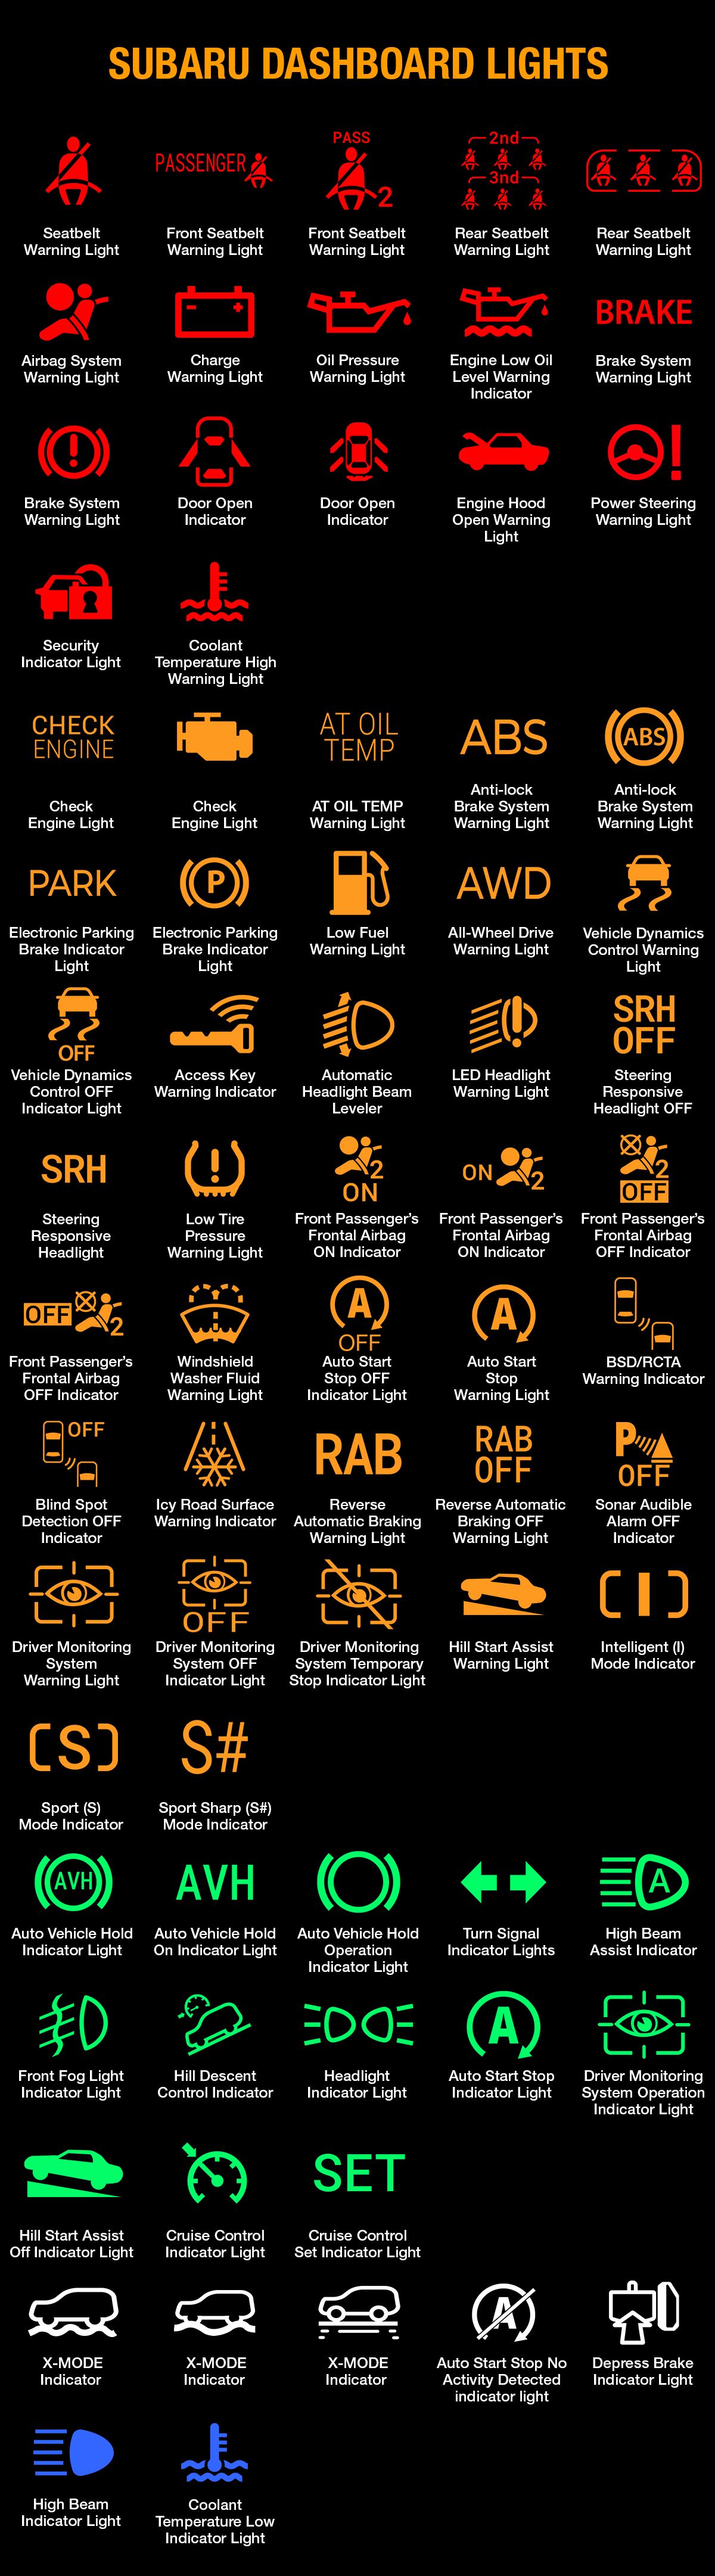 Subaru Dashboard Lights And Meanings (FULL List, FREE Download) - Dash ...